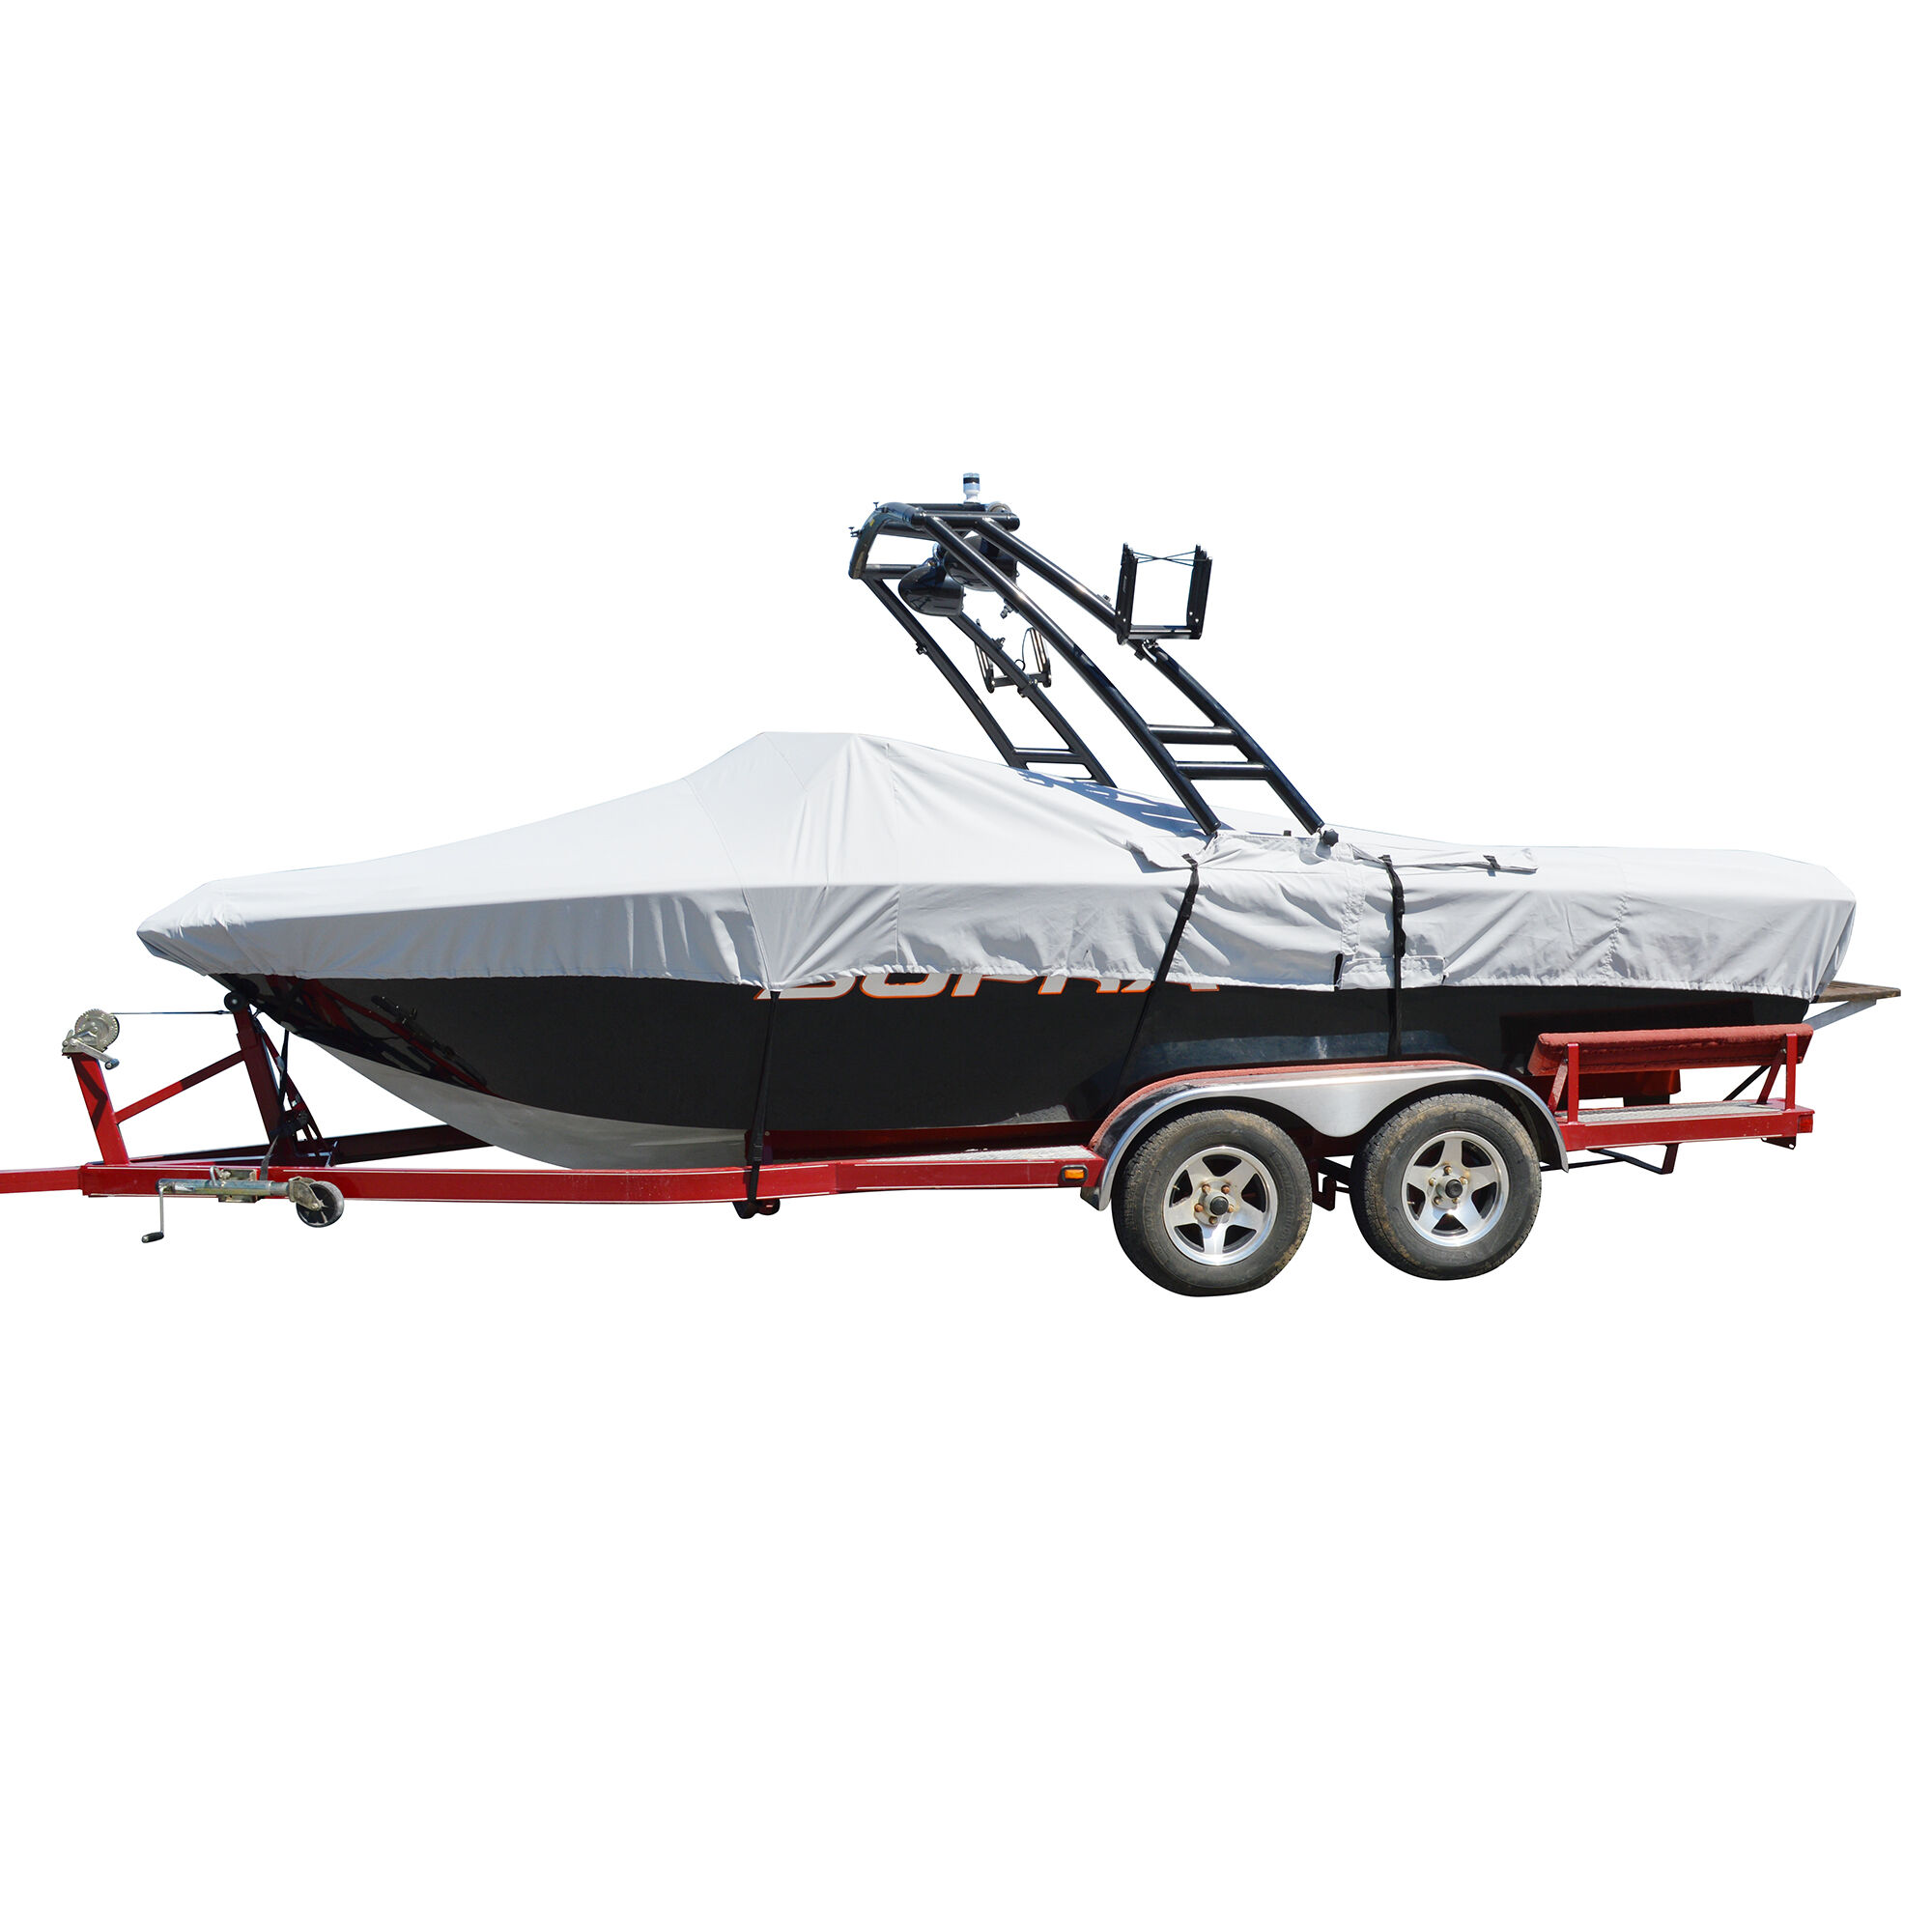 Westland Tower-All Select-Fit I/O Tournament Ski Boat Cover, 23'5" max length, 102" beam in Grey